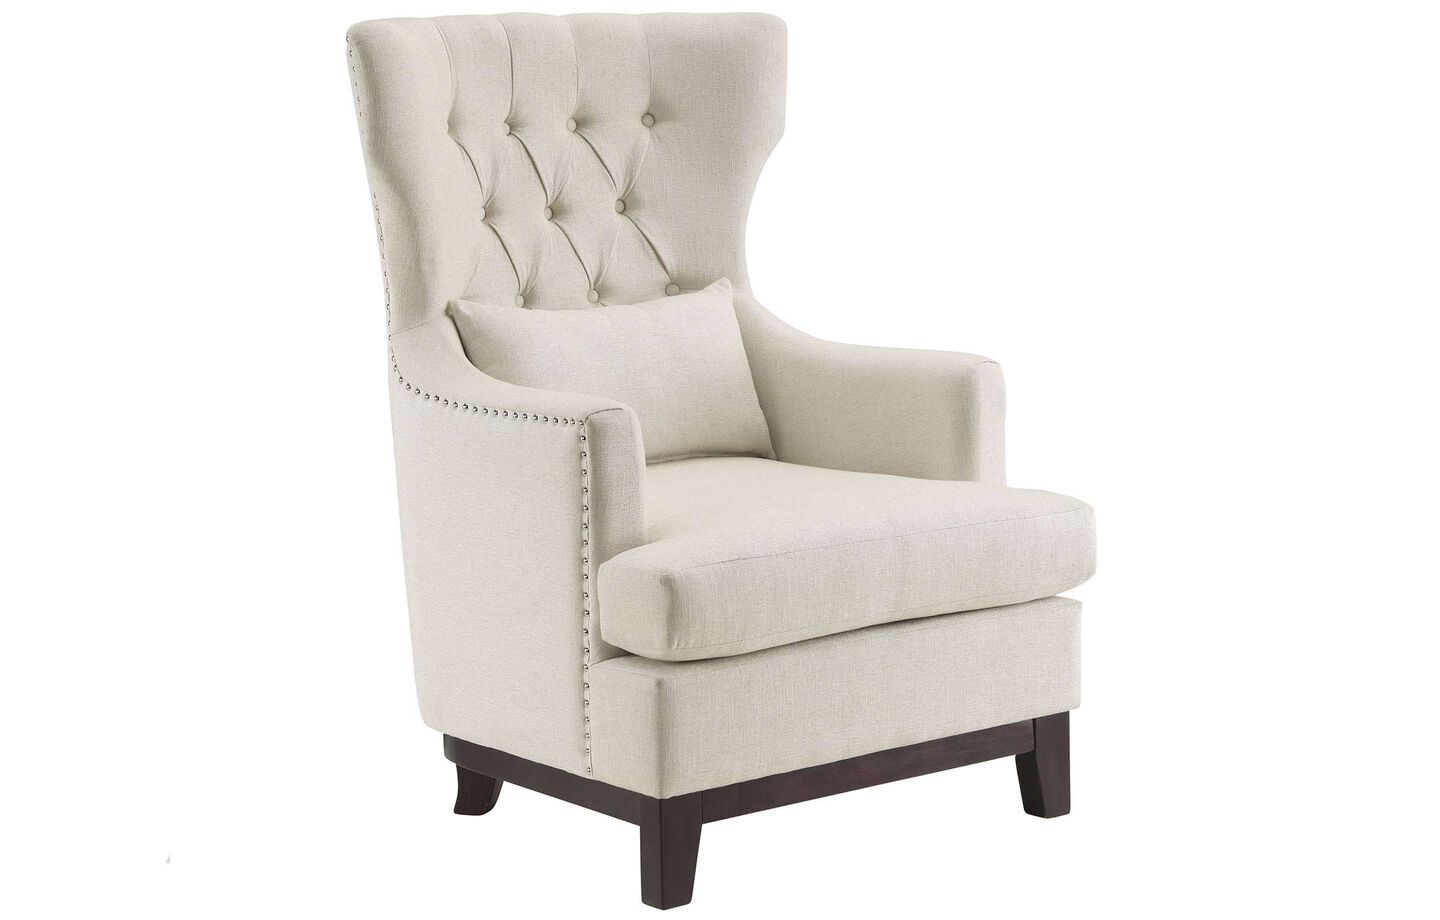 Homelegance Adriano Wing Back Chair image number 2